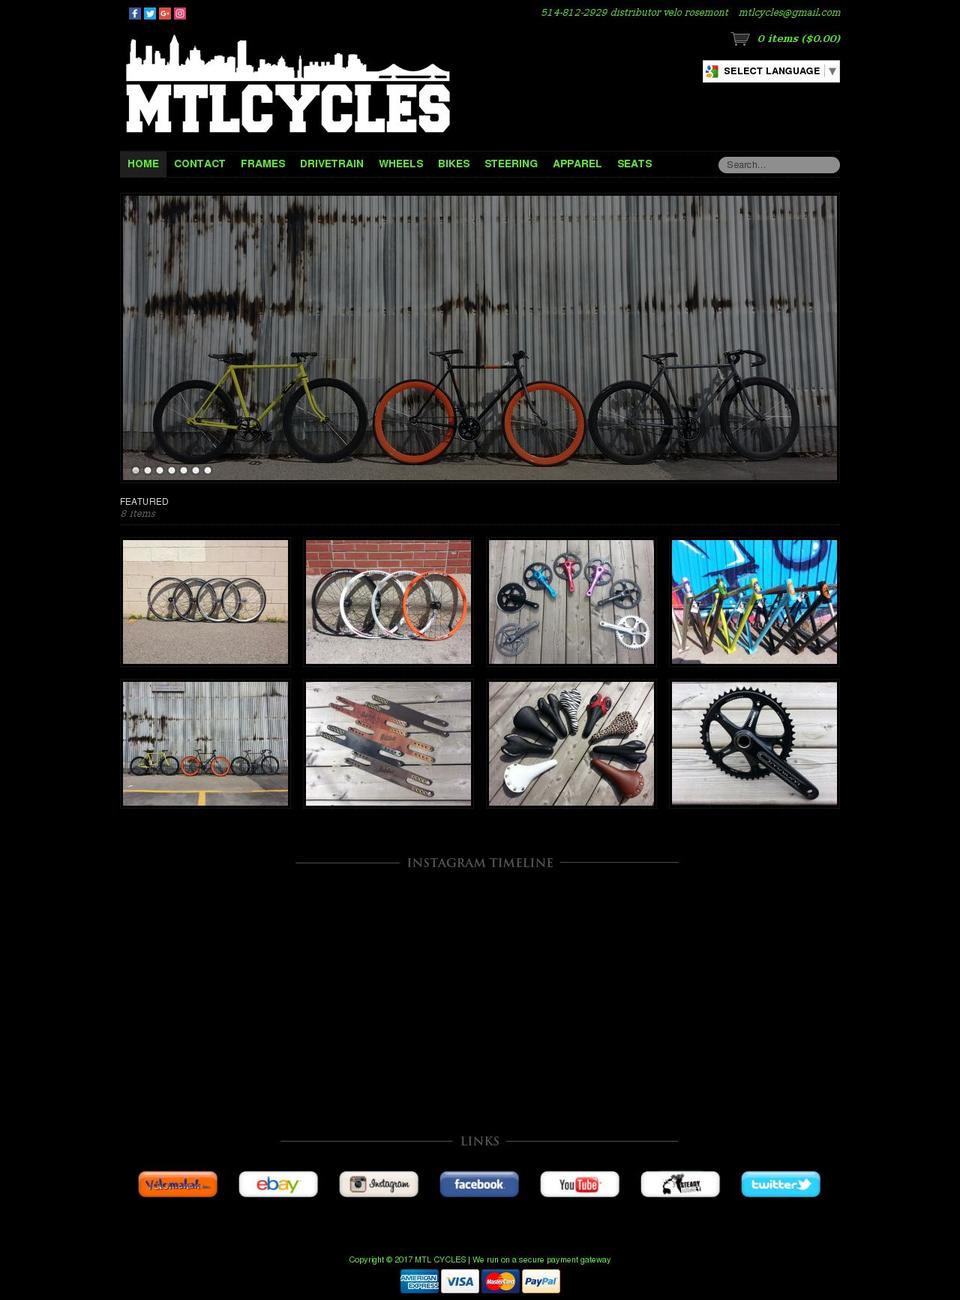 Couture Shopify theme site example montrealcycles.com